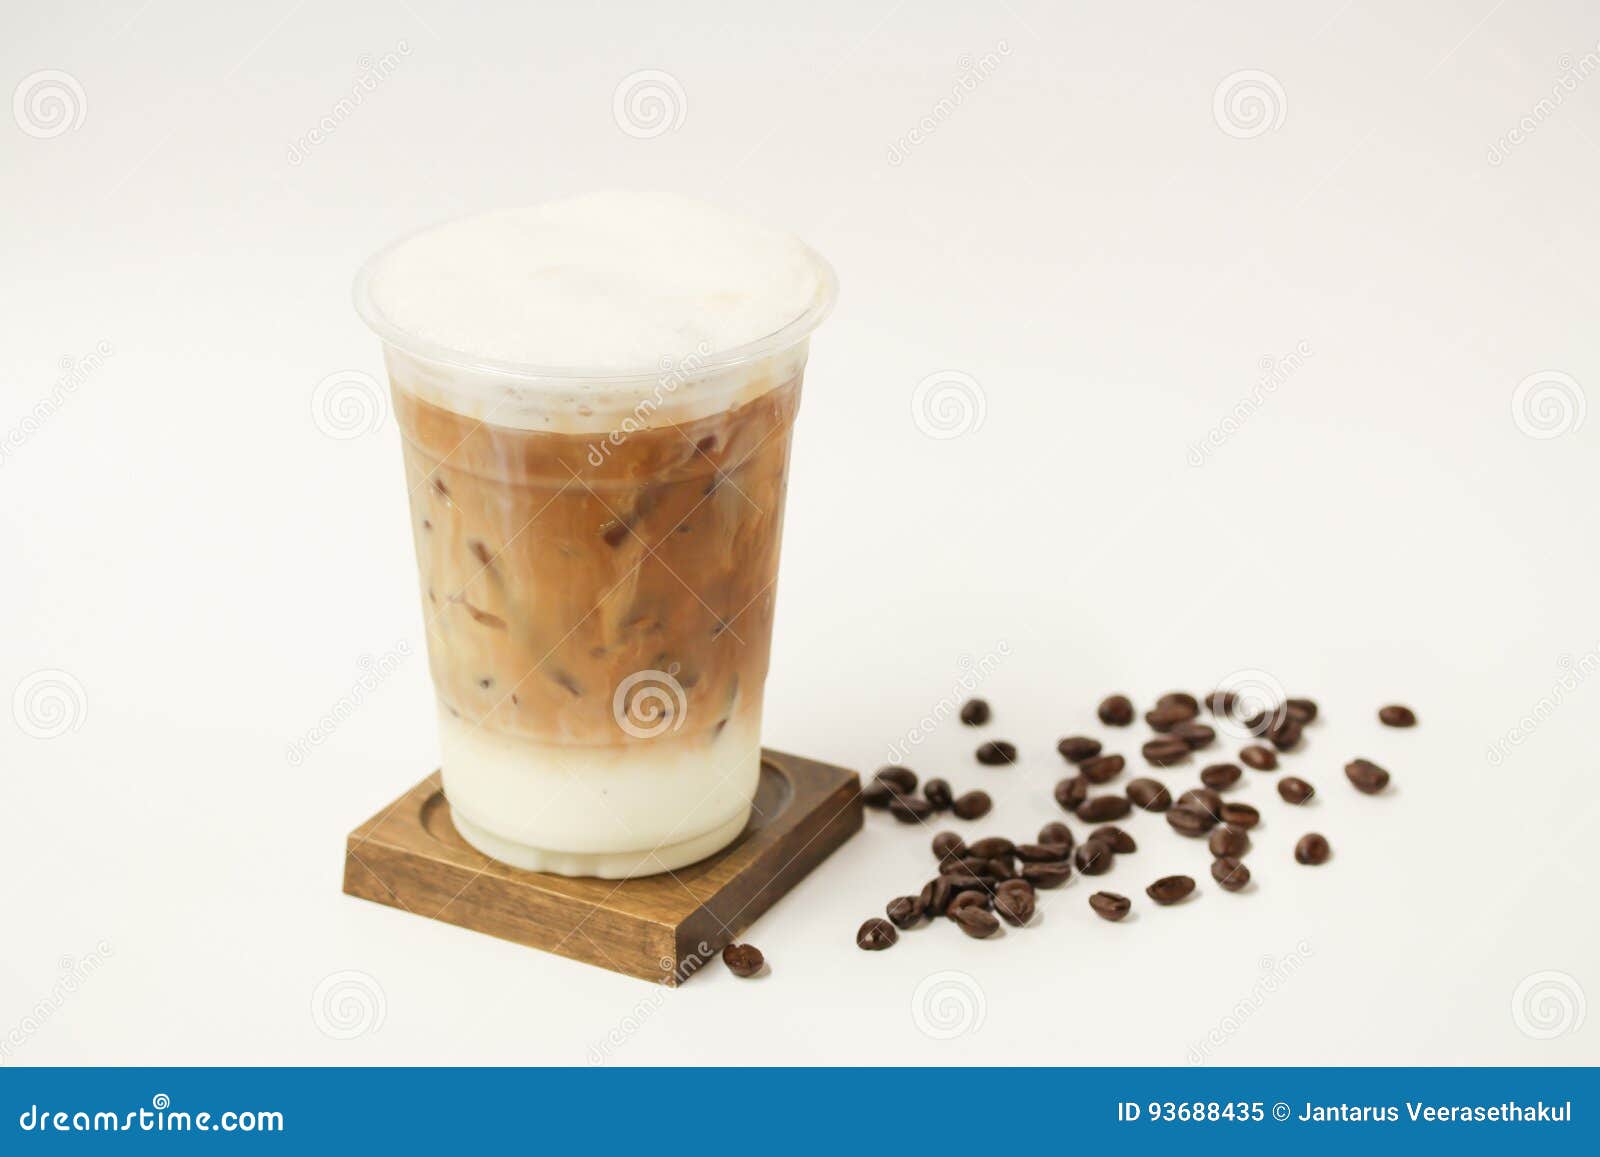 Iced Coffee Caffe Latte Takeaway Cup Stock Photo 537538621